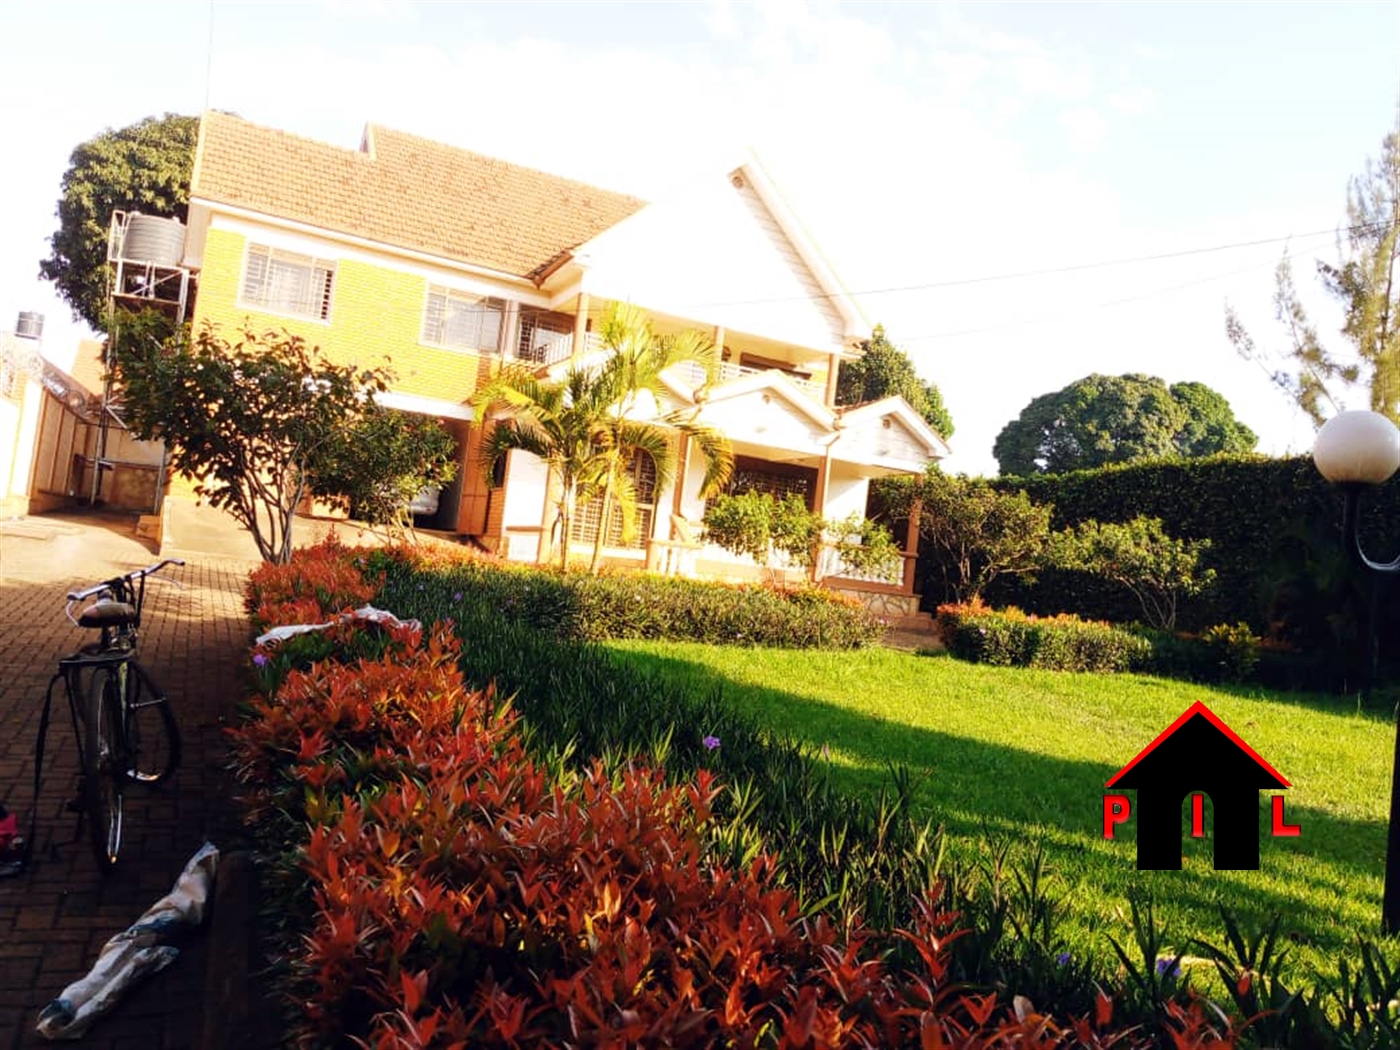 Mansion for sale in Bukoto Kampala